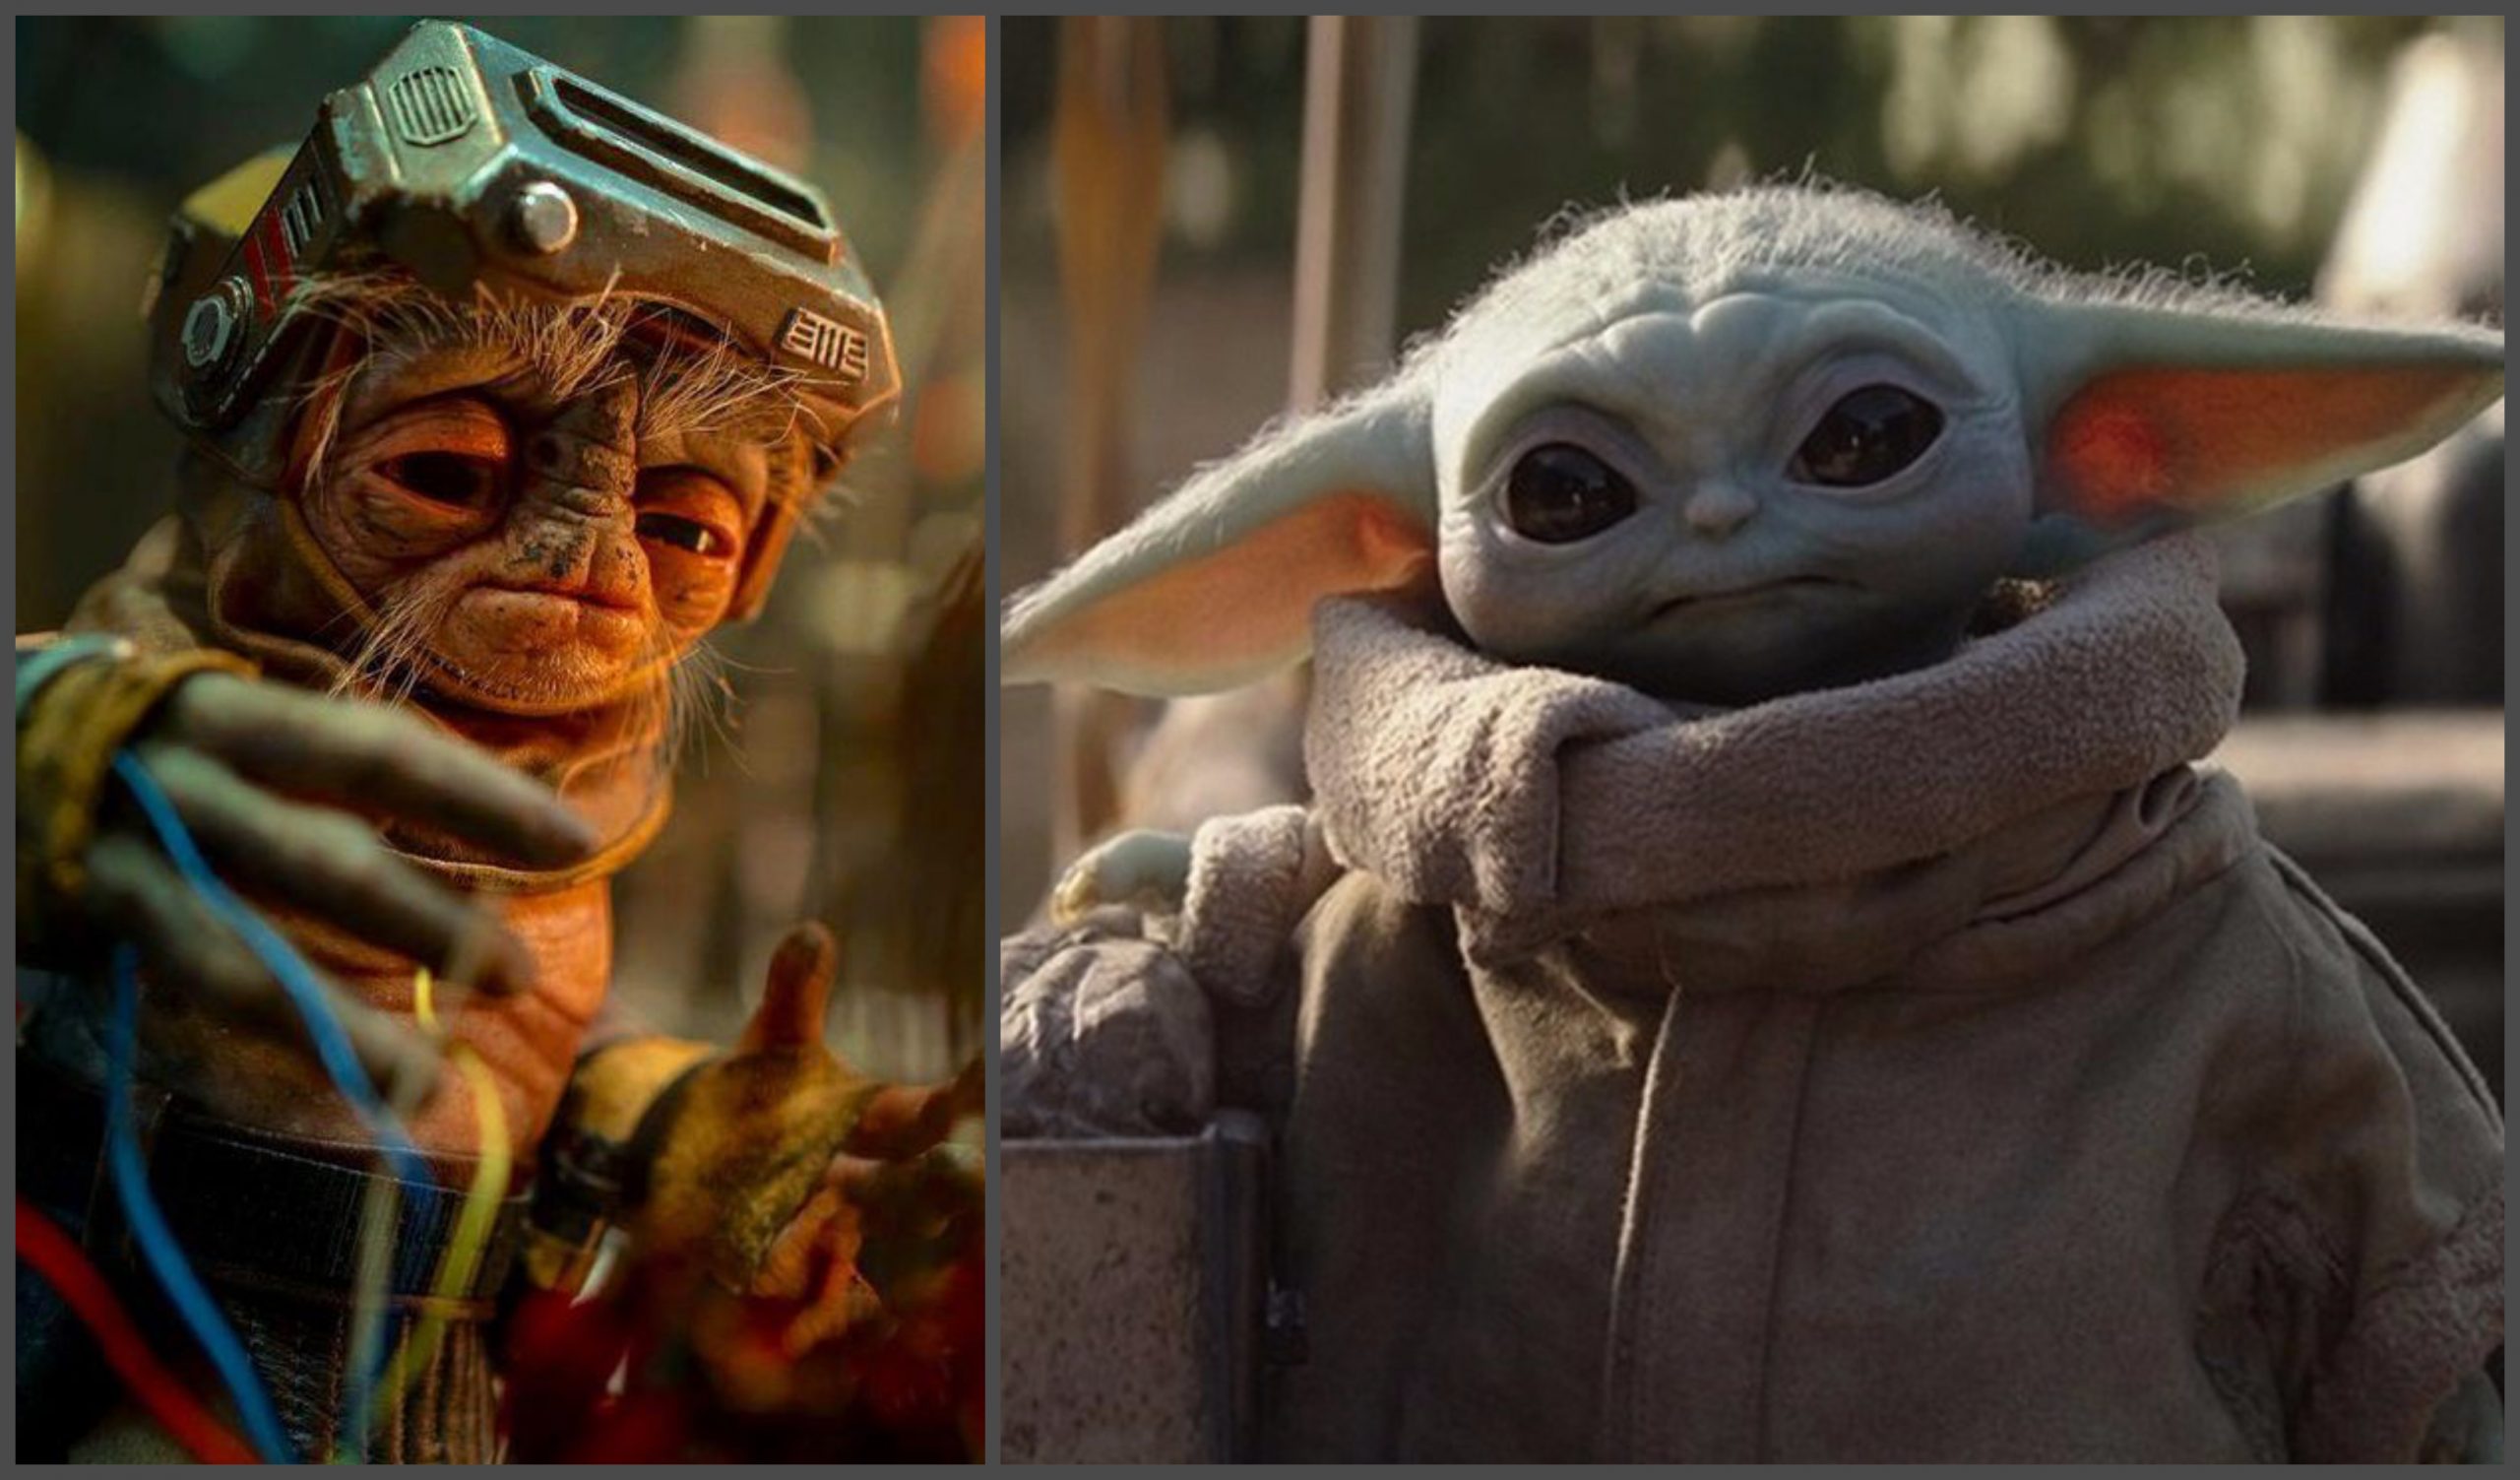 Star Wars Fans Are Moving On From “Baby Yoda” To New Character in ‘The Rise of Skywalker’